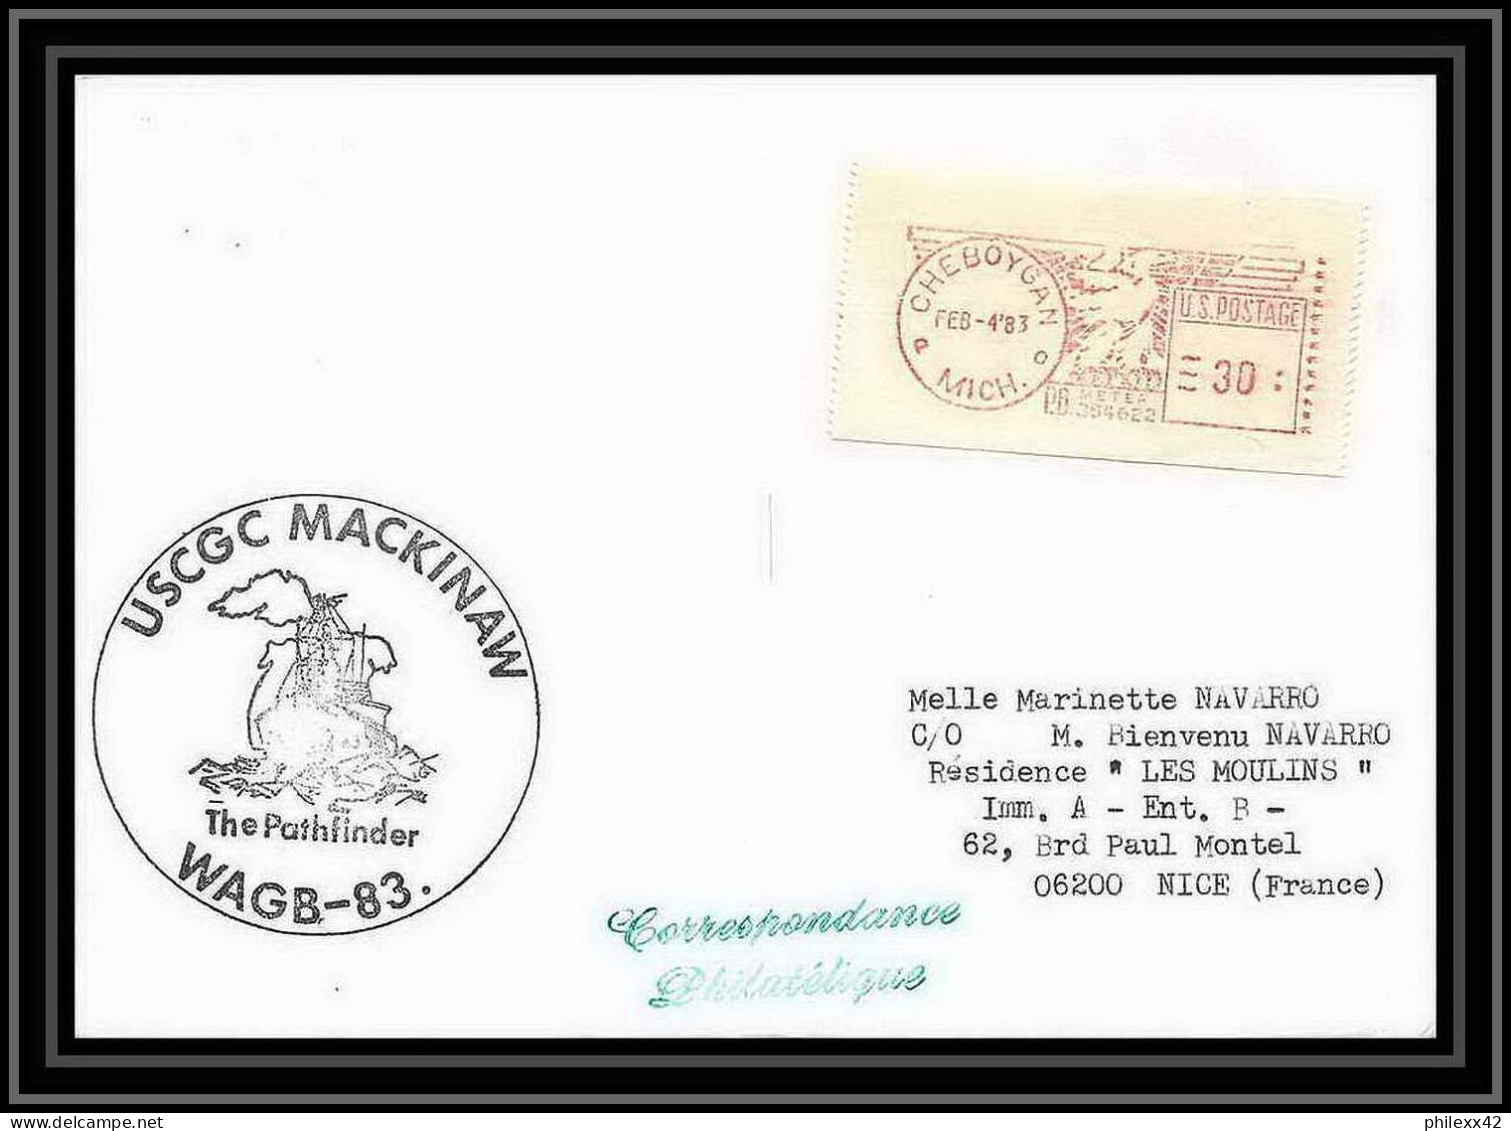 1998 Antarctic USA Lettre (cover) Uscgc Mackinaw Pathfinder Wagb-83 4/2/1983 - Scientific Stations & Arctic Drifting Stations